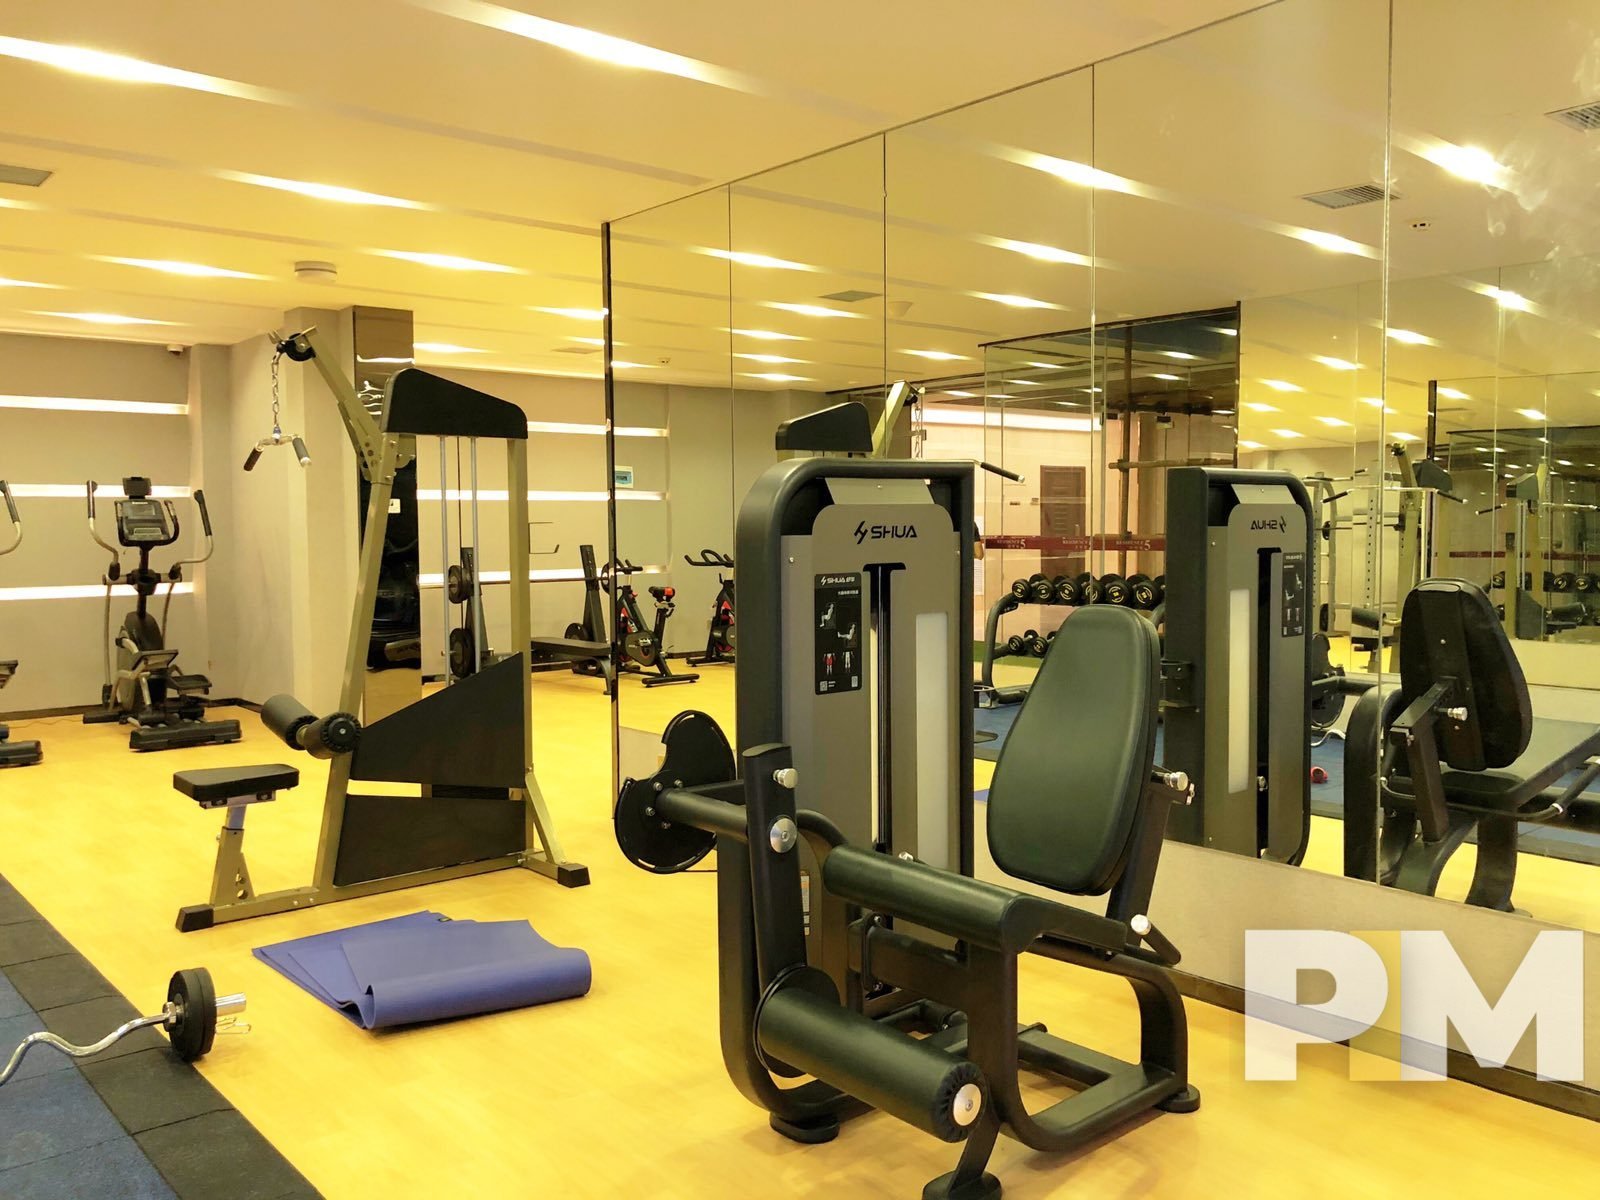 Gym - Condo for rent in Kamayut